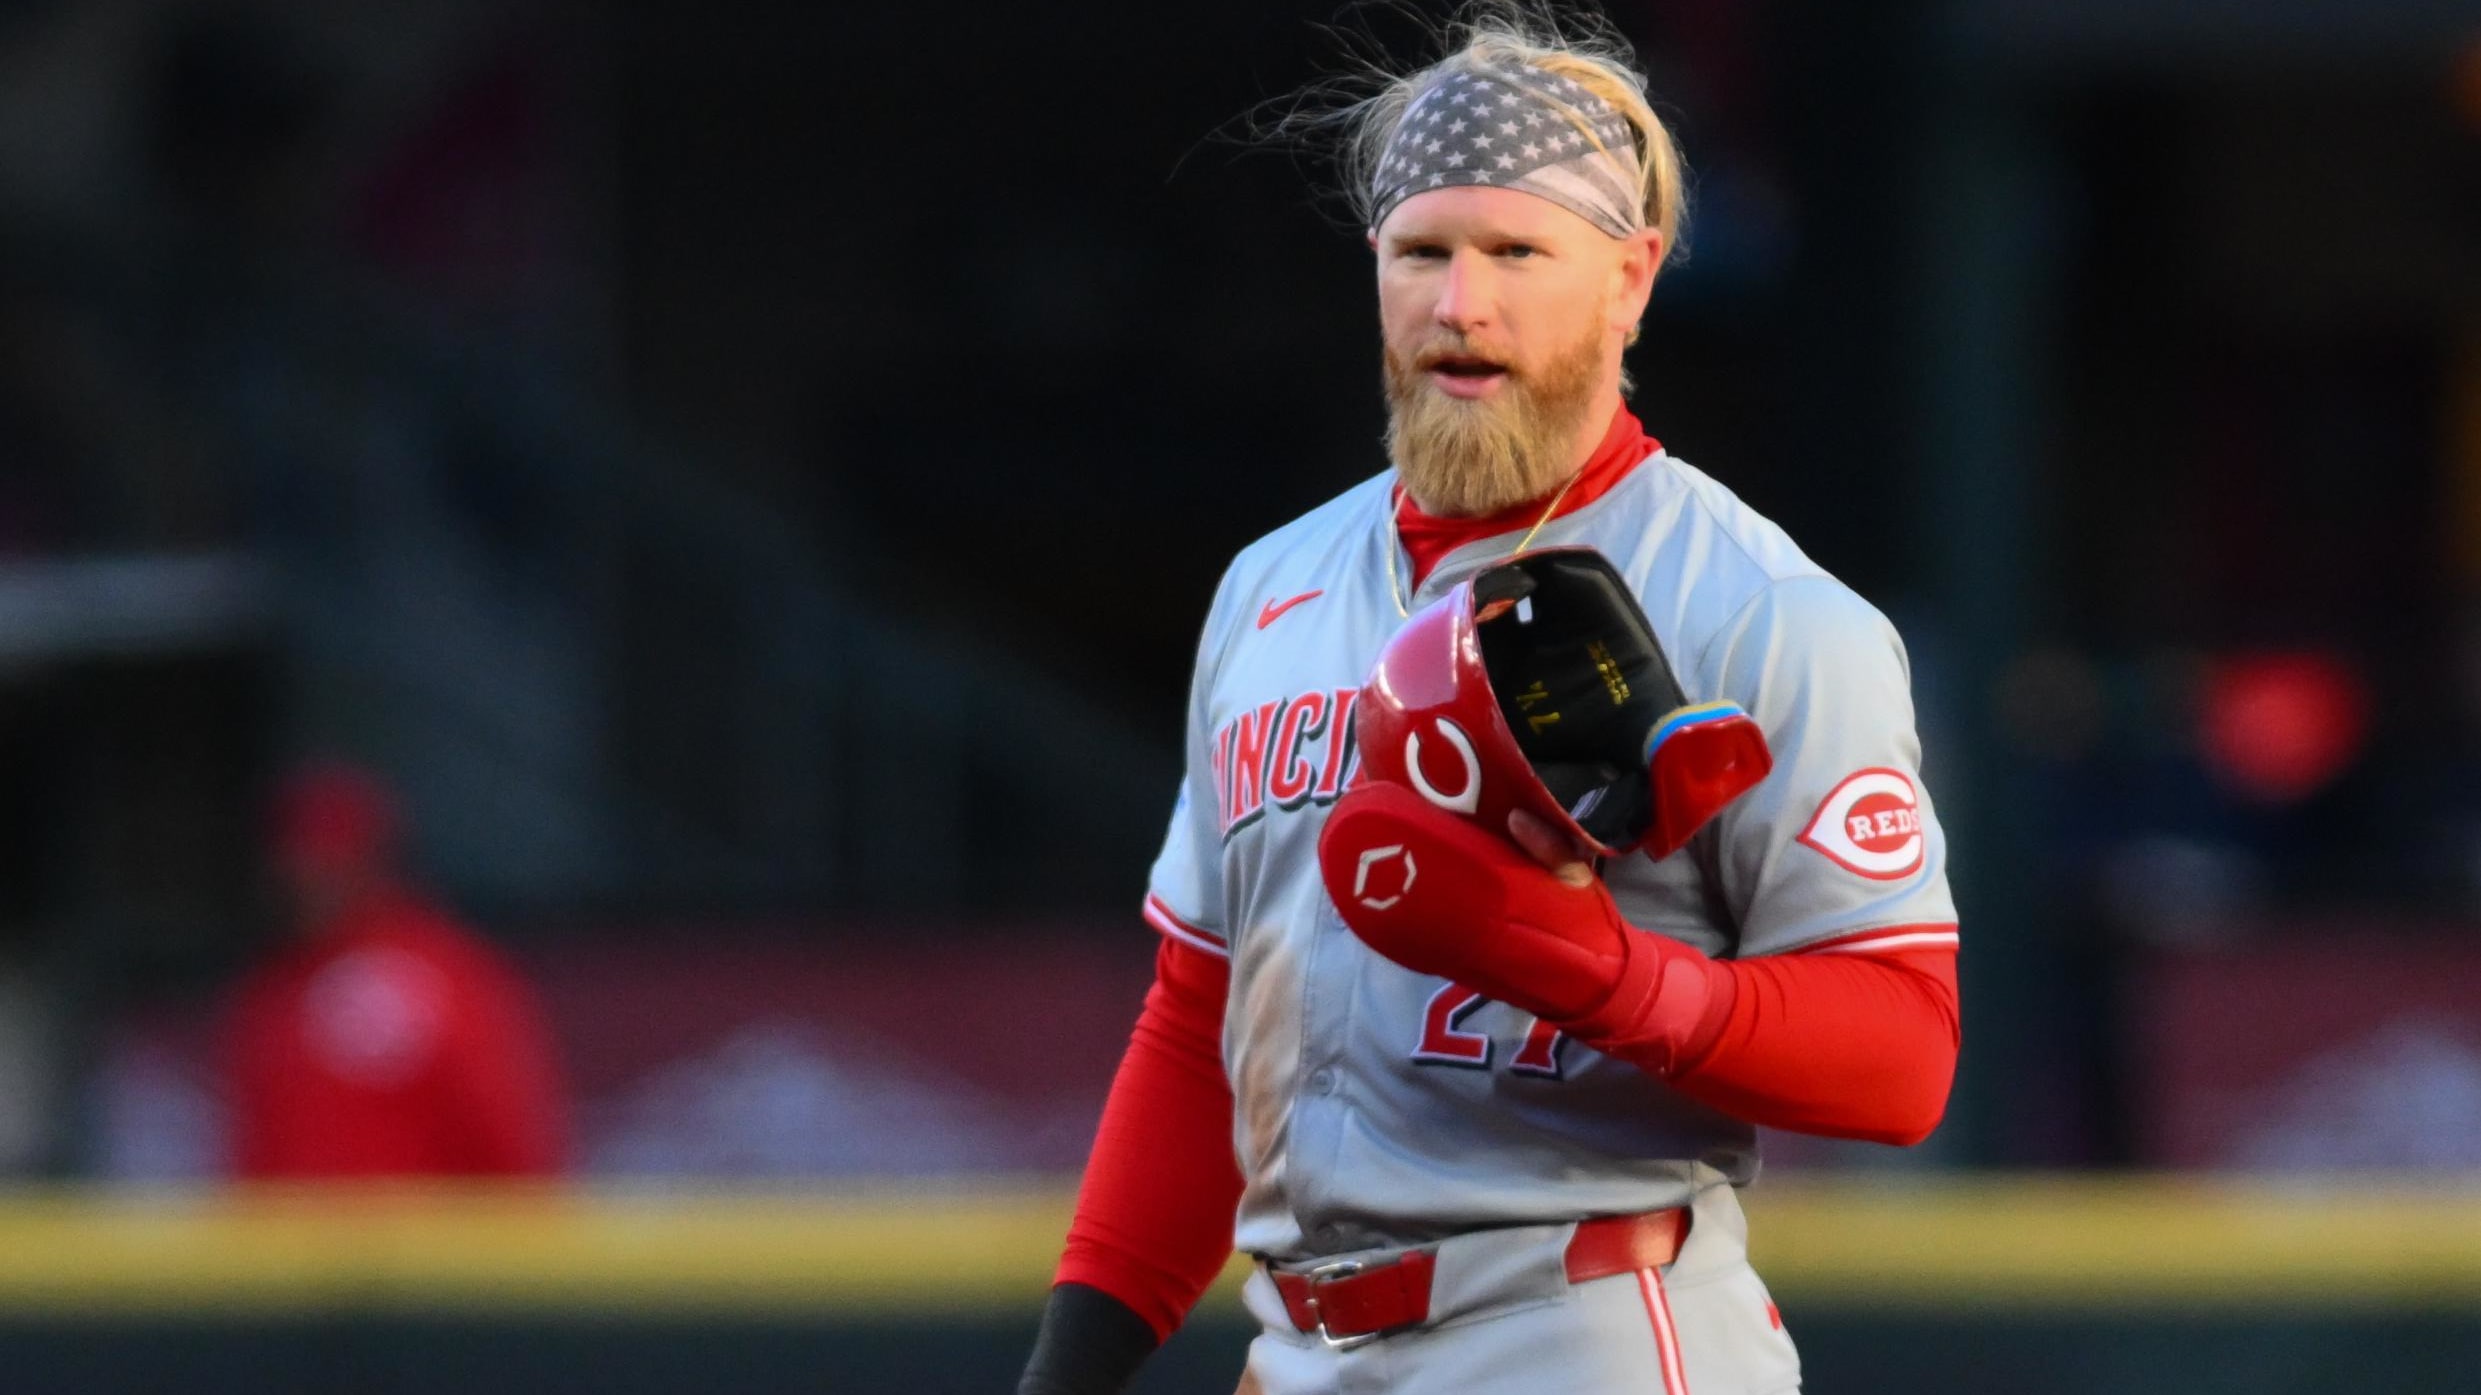  Cincinnati Reds Lose to Seattle Mariners 3-1 on Tuesday Night 